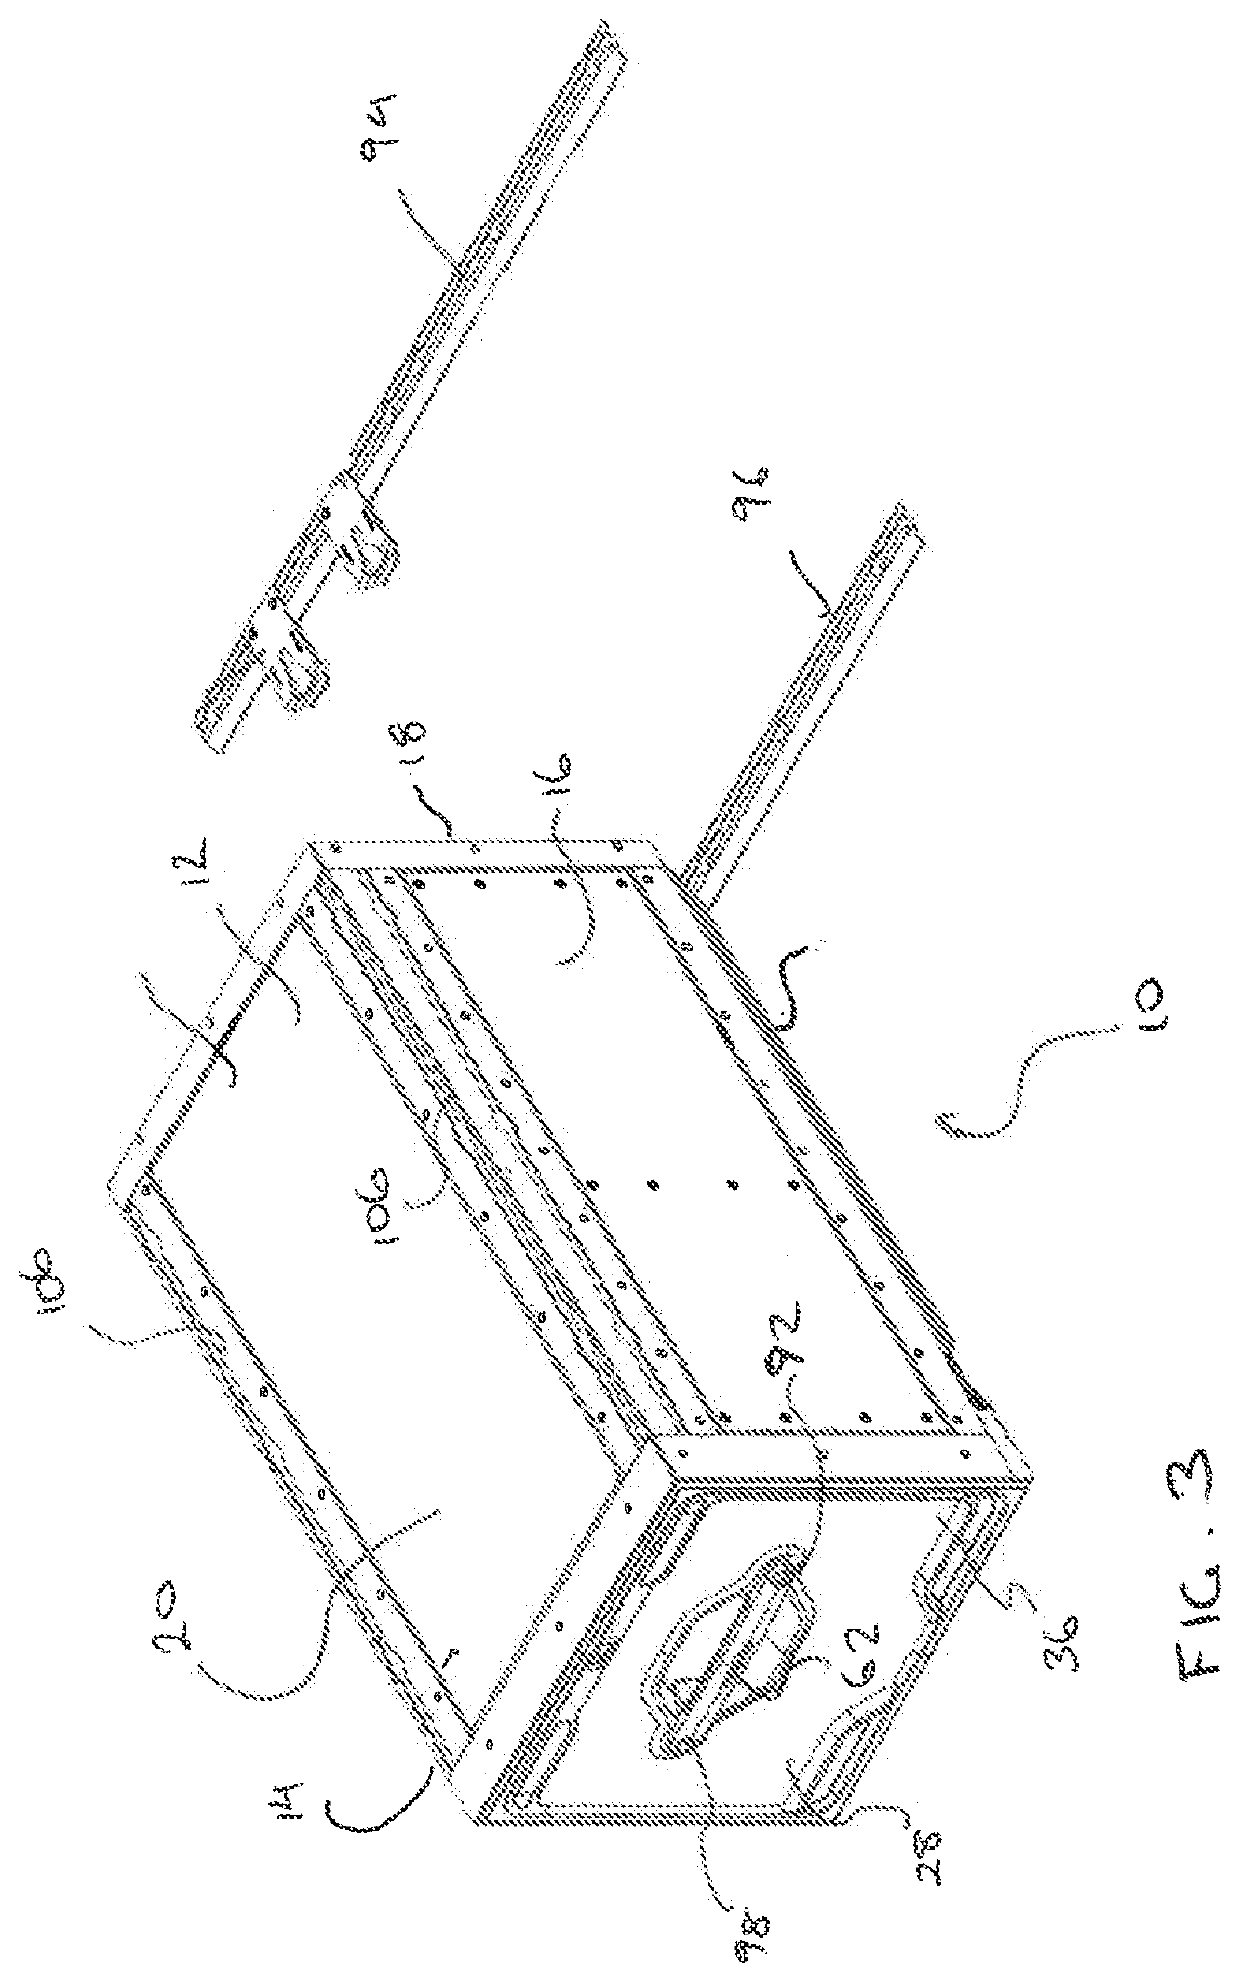 Storage system suitable for installation in or on a vehicle